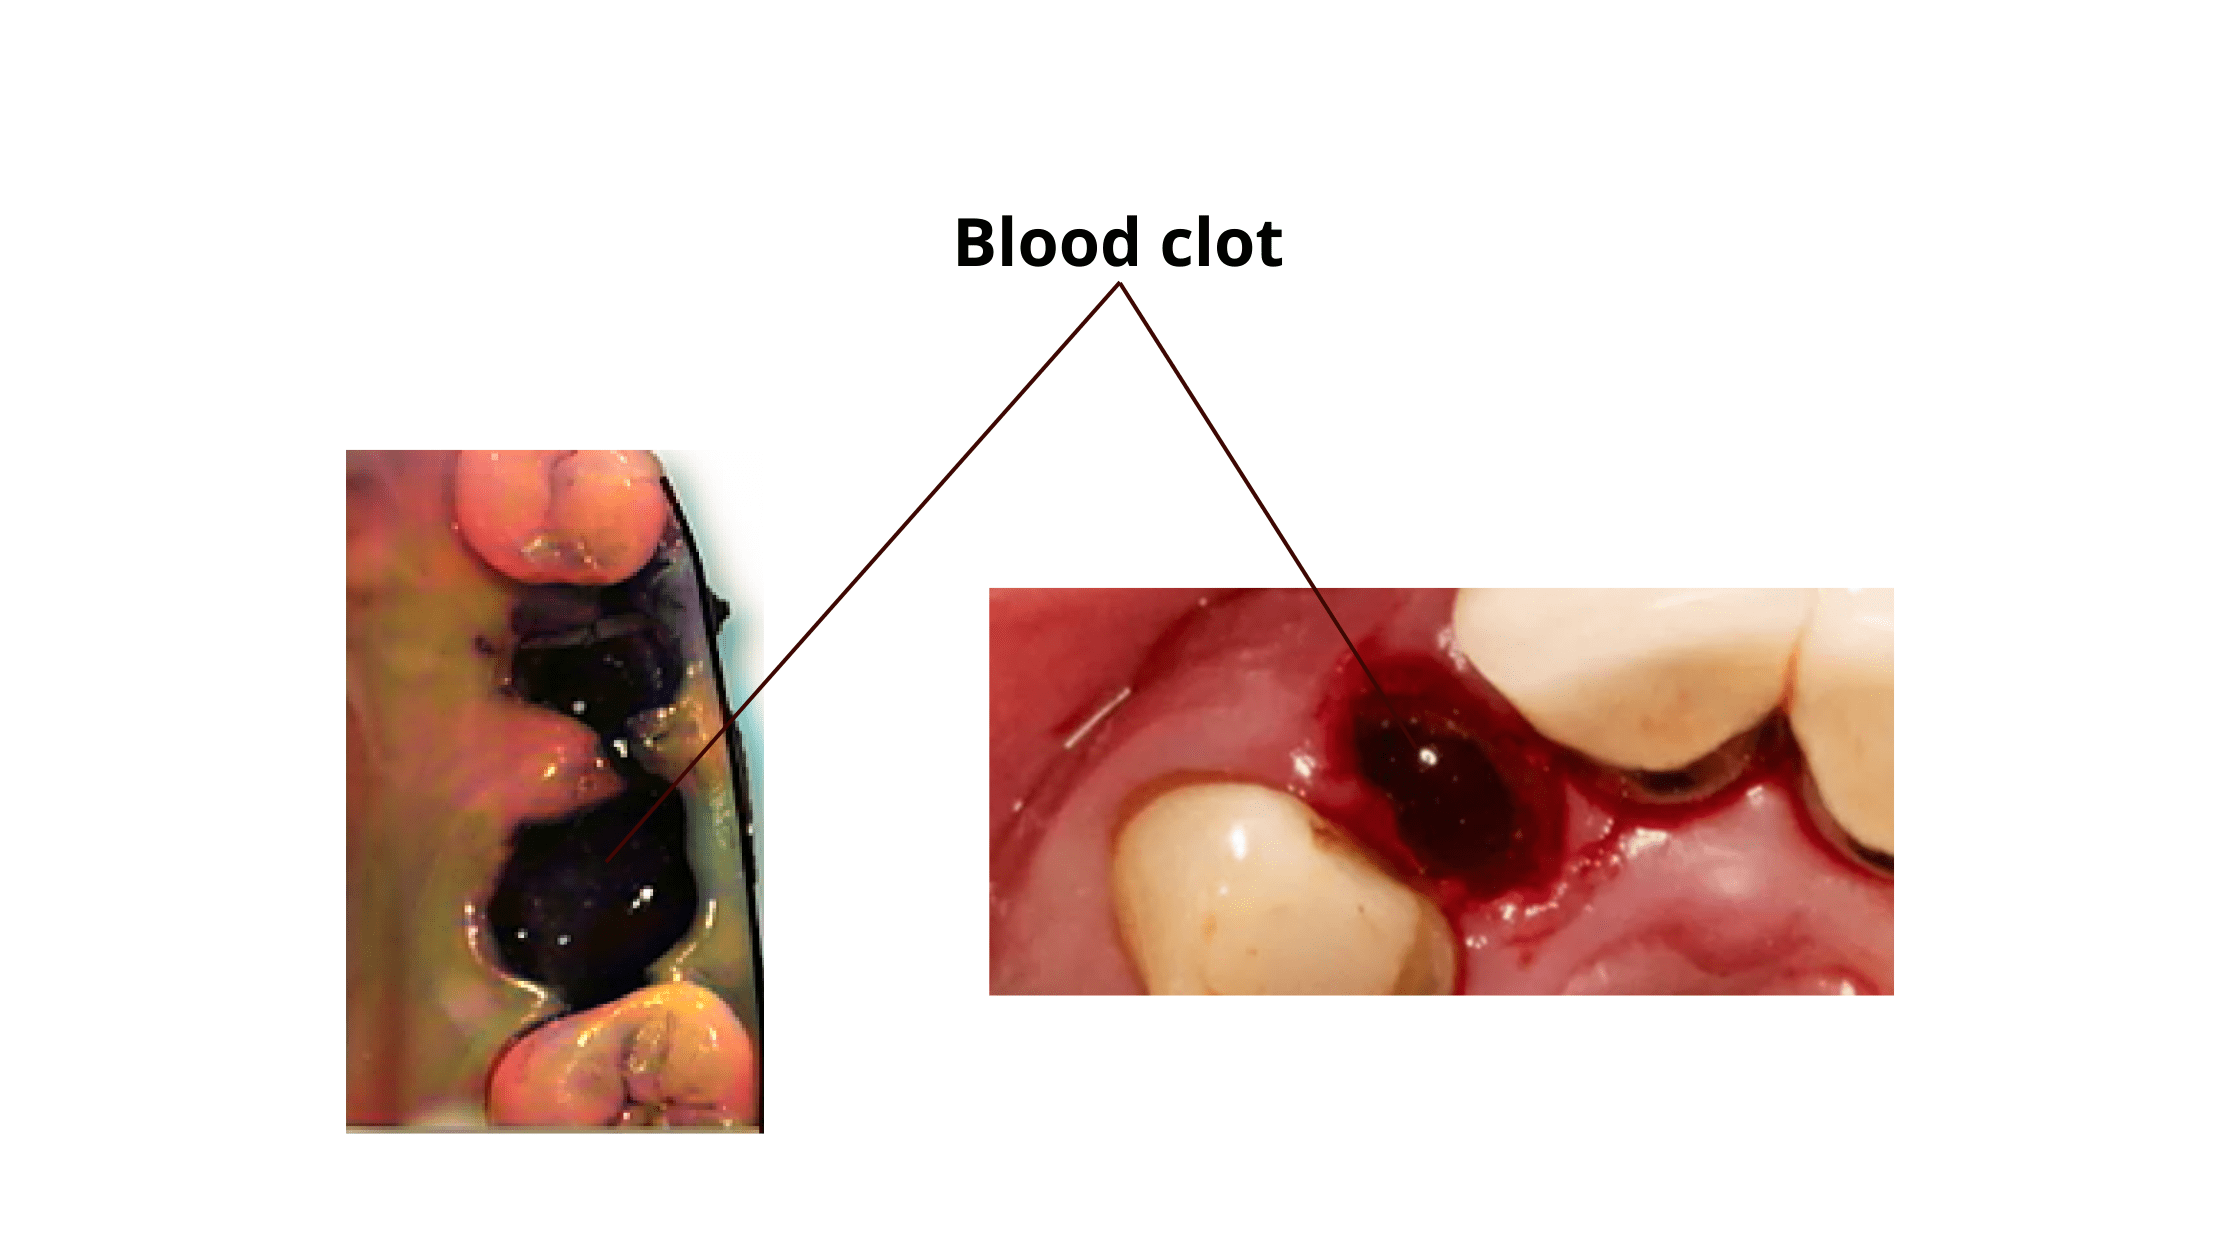 clinical images of blood clots after dental extraction